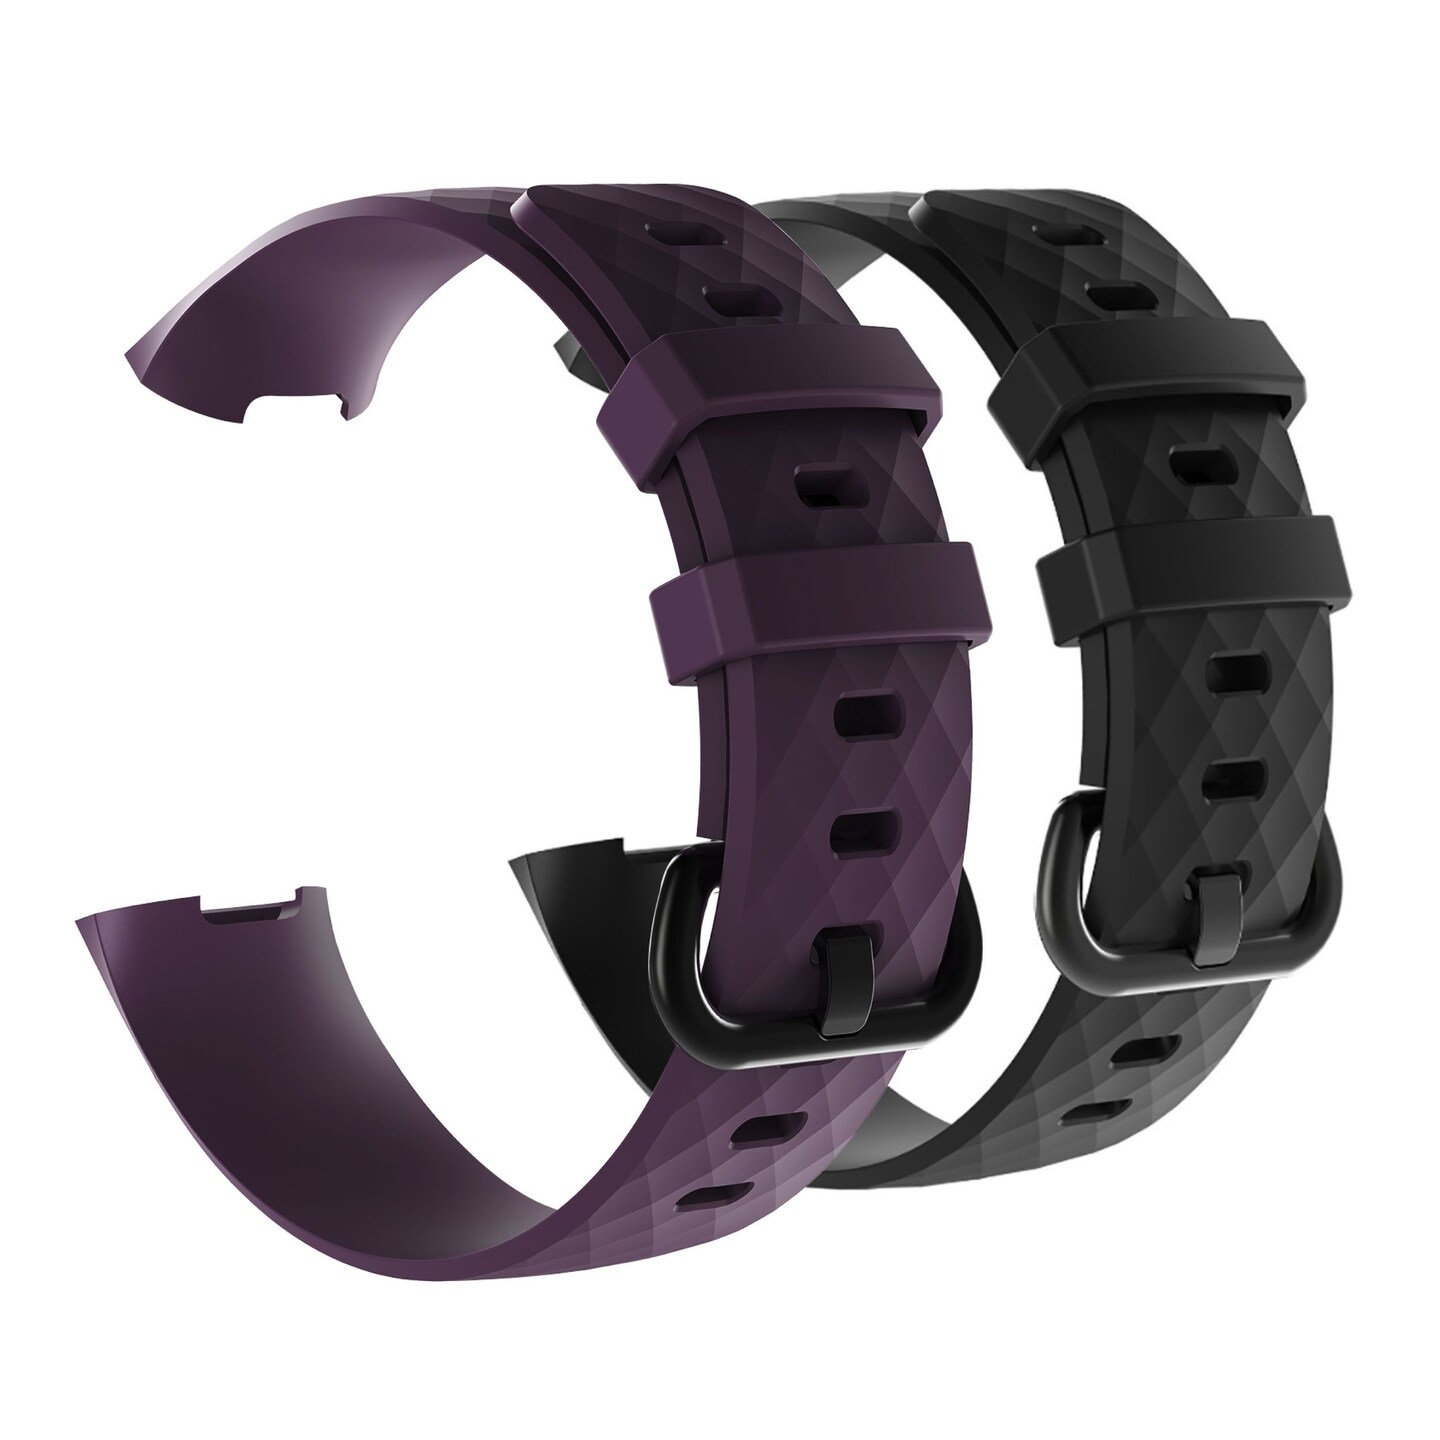 For Fitbit Charge 3 / 3 SE / 4 Bands, 2 Pack Replacement Strap for Women Men, Size Small, Black and Purple